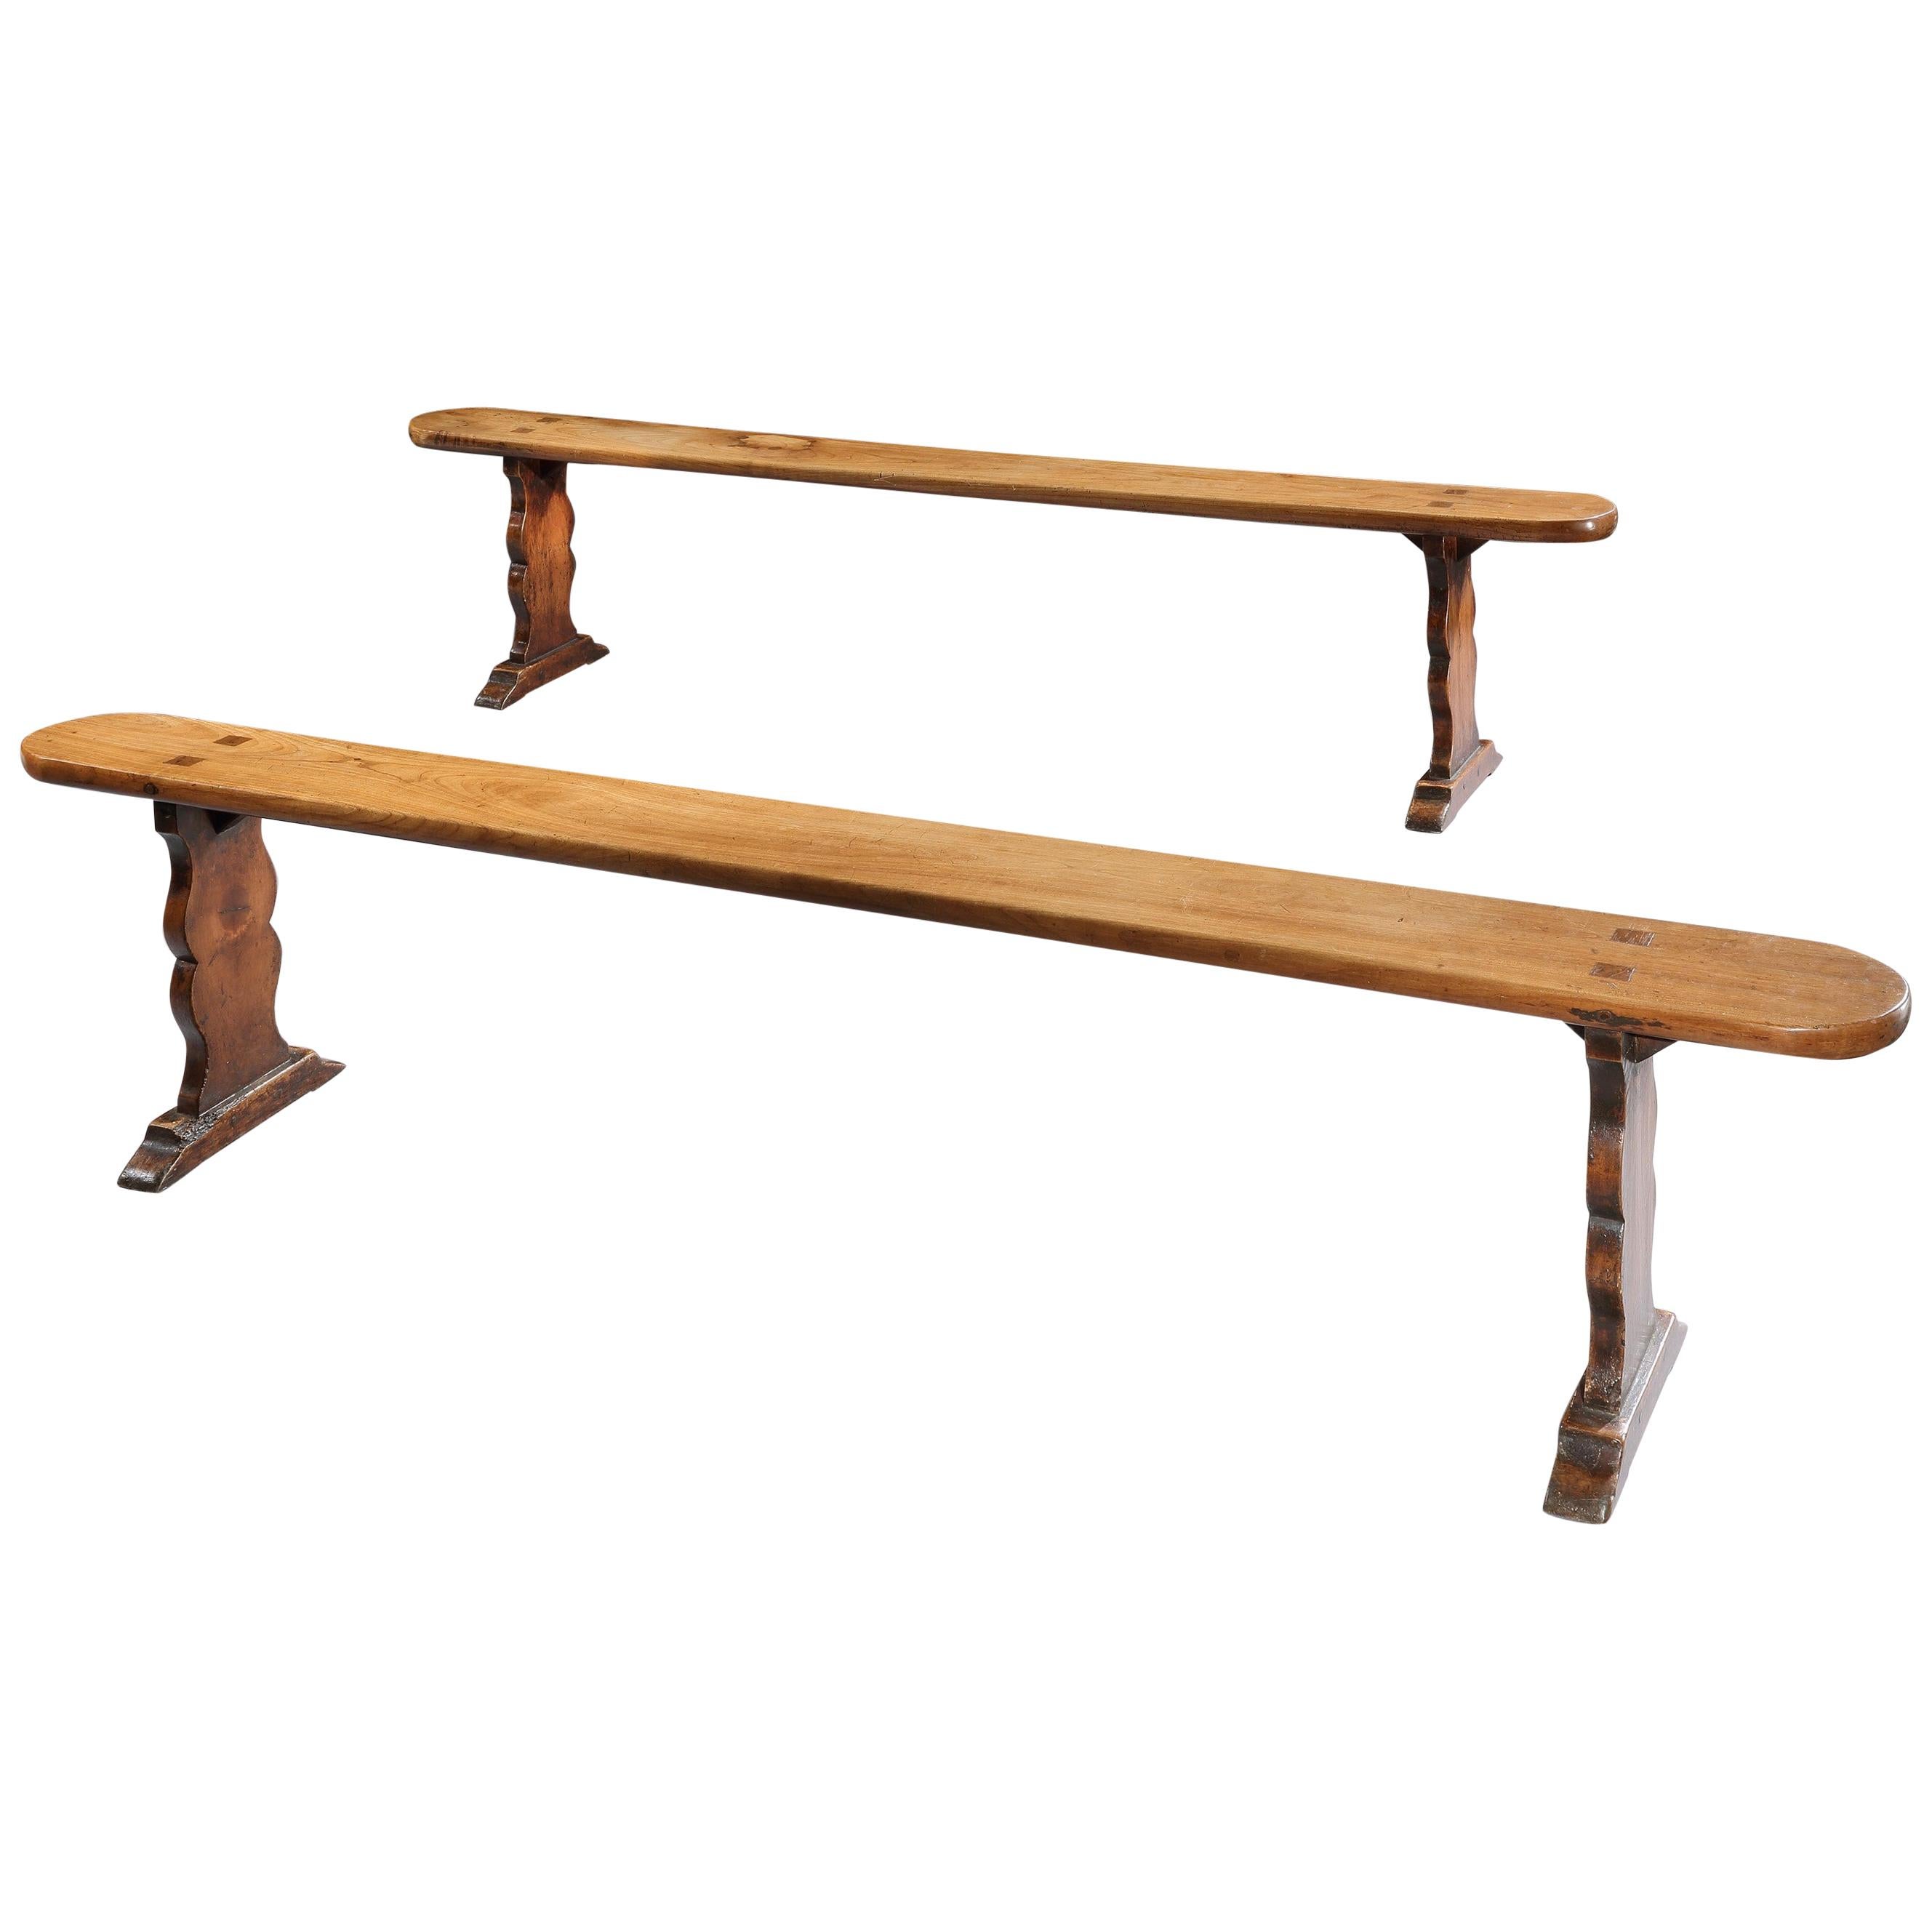 Bench, Pair 18th Century, French, Vernacular, Provincial, Elm, Trestle